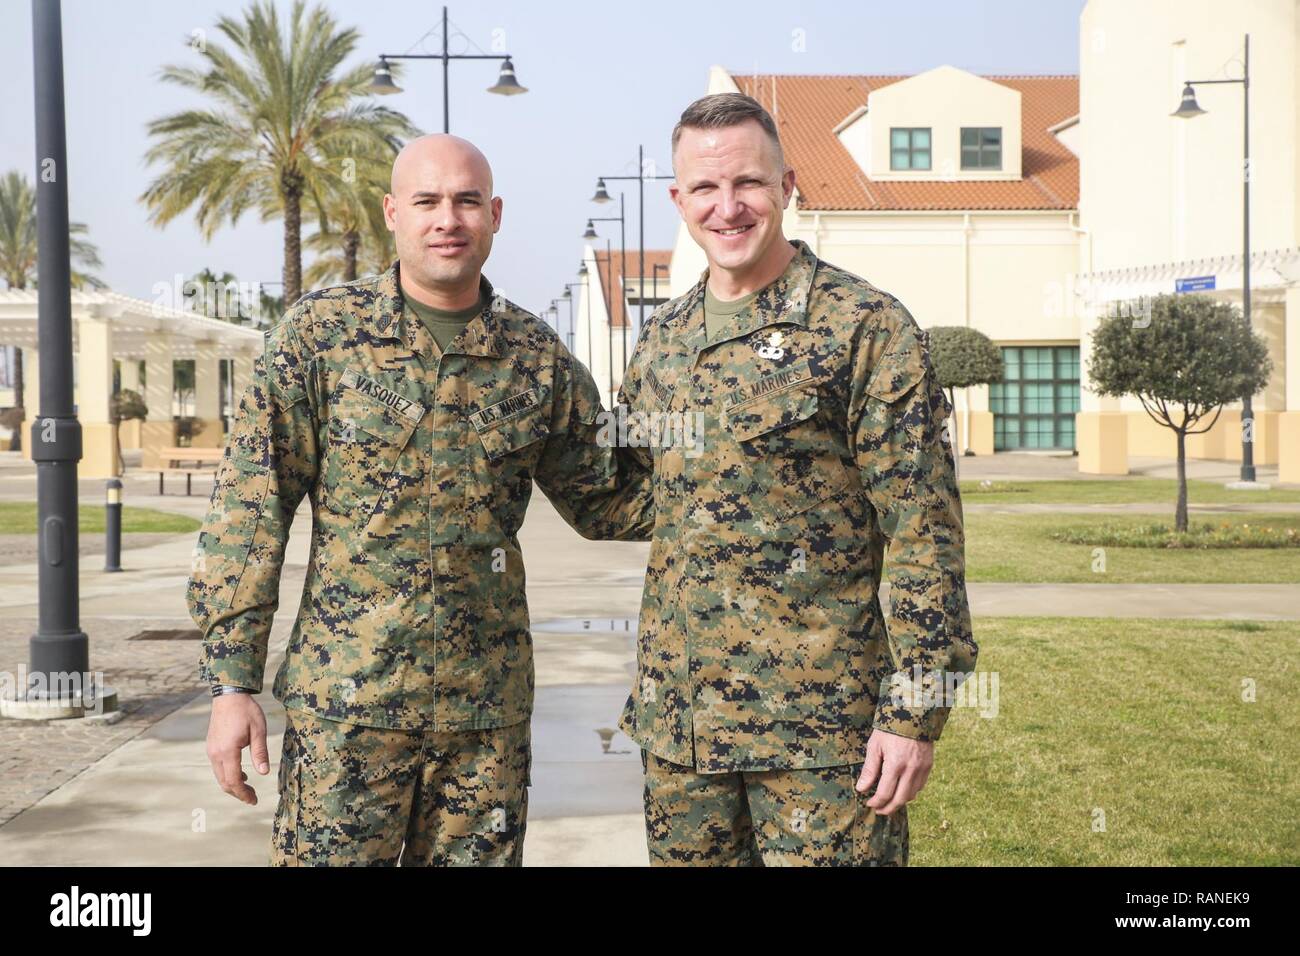 Gunnery Sgt. Juan Vasquez Jr., left, a U.S. Marine assigned to Special Purpose Marine Air-Ground Task Force – Crisis Response – Africa, poses for a photo with Col. Daniel Greenwood, the commanding officer of SPMAGTF-CR-AF, at Naval Air Station Sigonella, Italy, Feb. 25, 2017. Greenwood formerly served as the commanding officer for Marine Corps Recruiting Station Fort Lauderdale, Florida, while Vasquez was a poolee for the station in 2003. Stock Photo